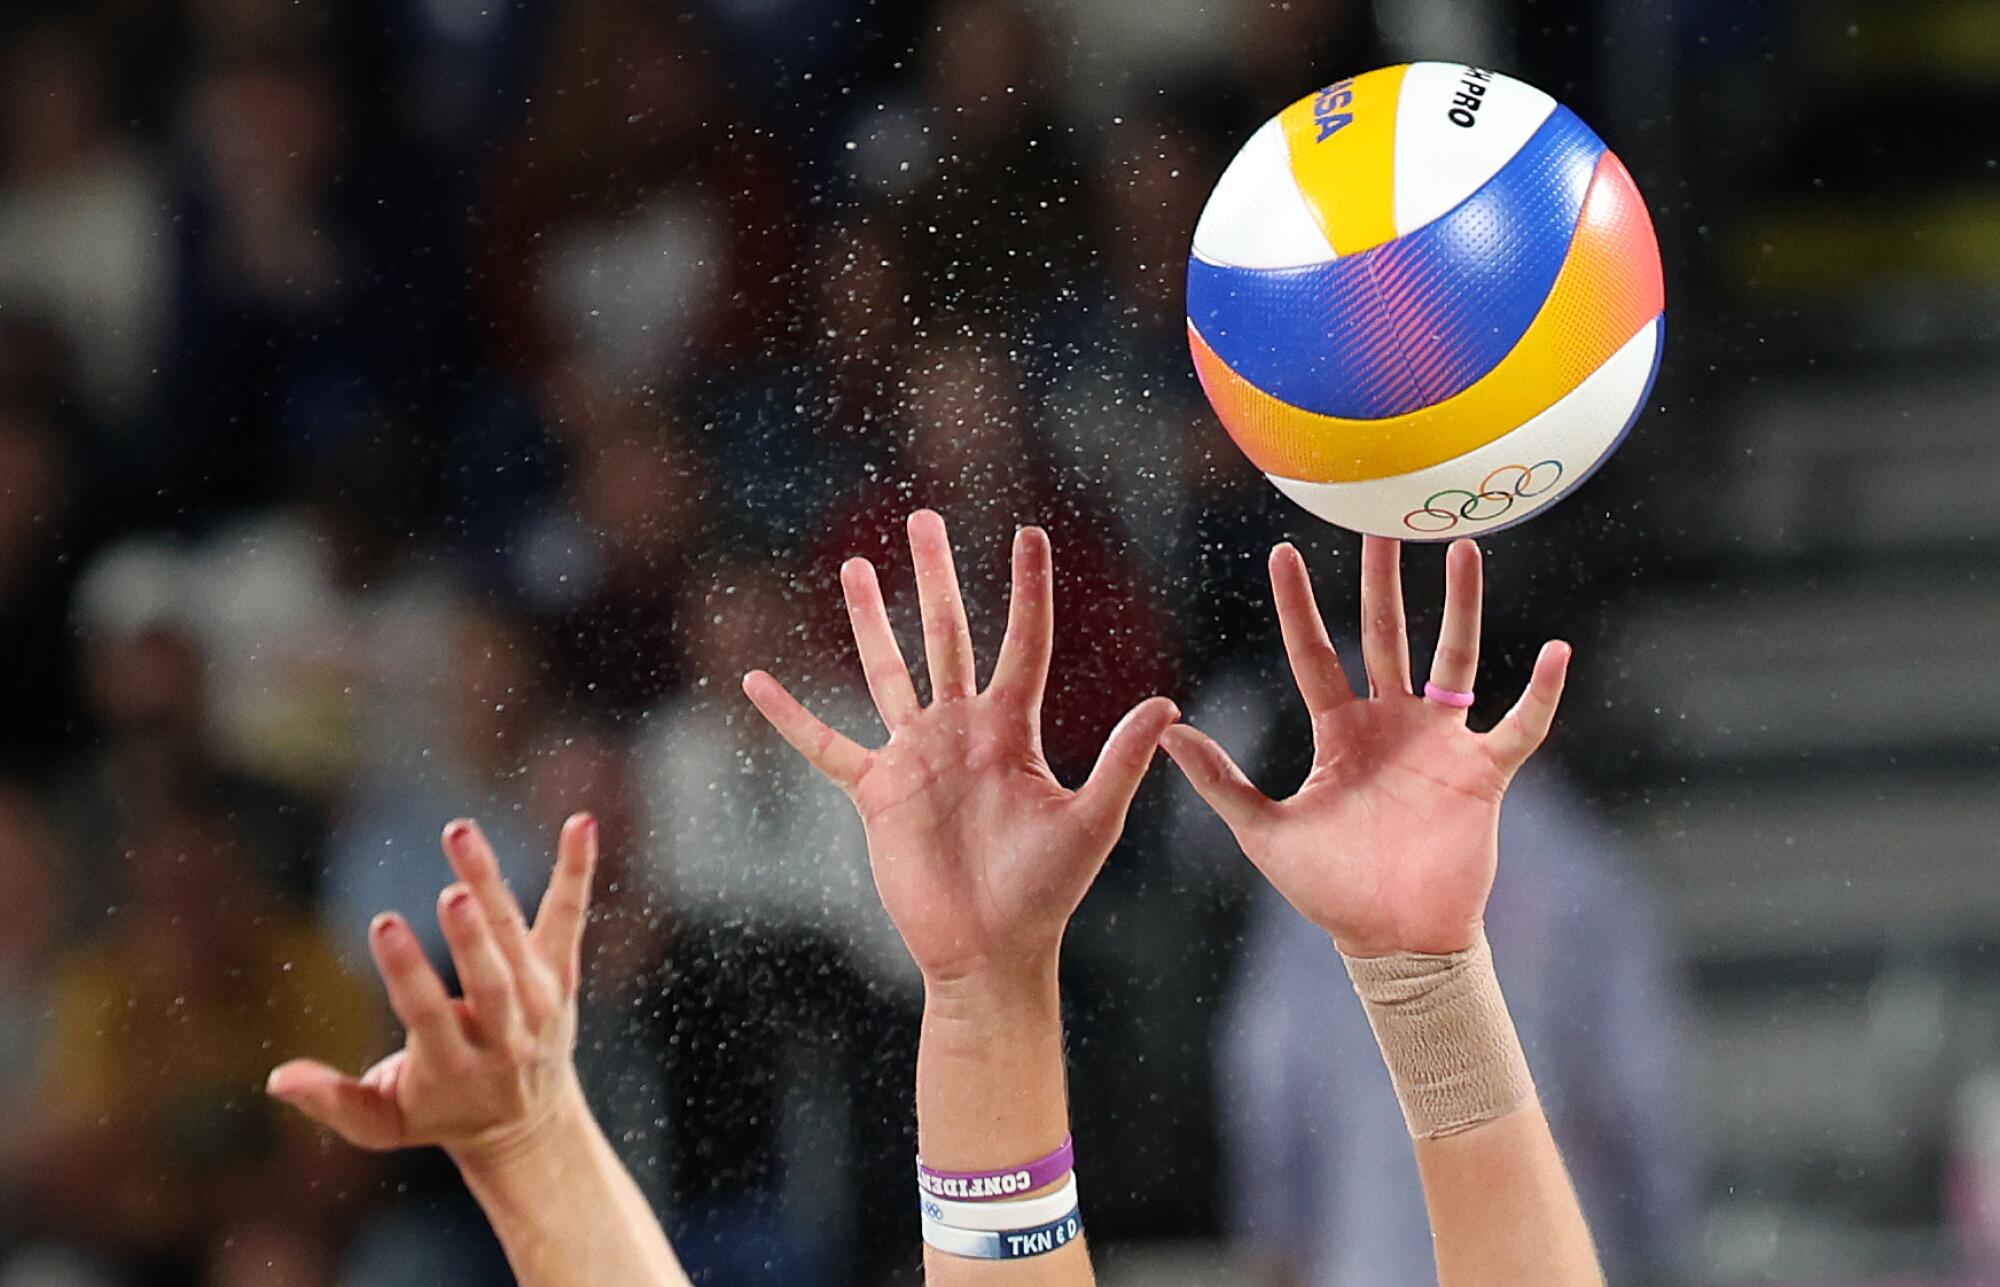 Hands reach for a volleyball.